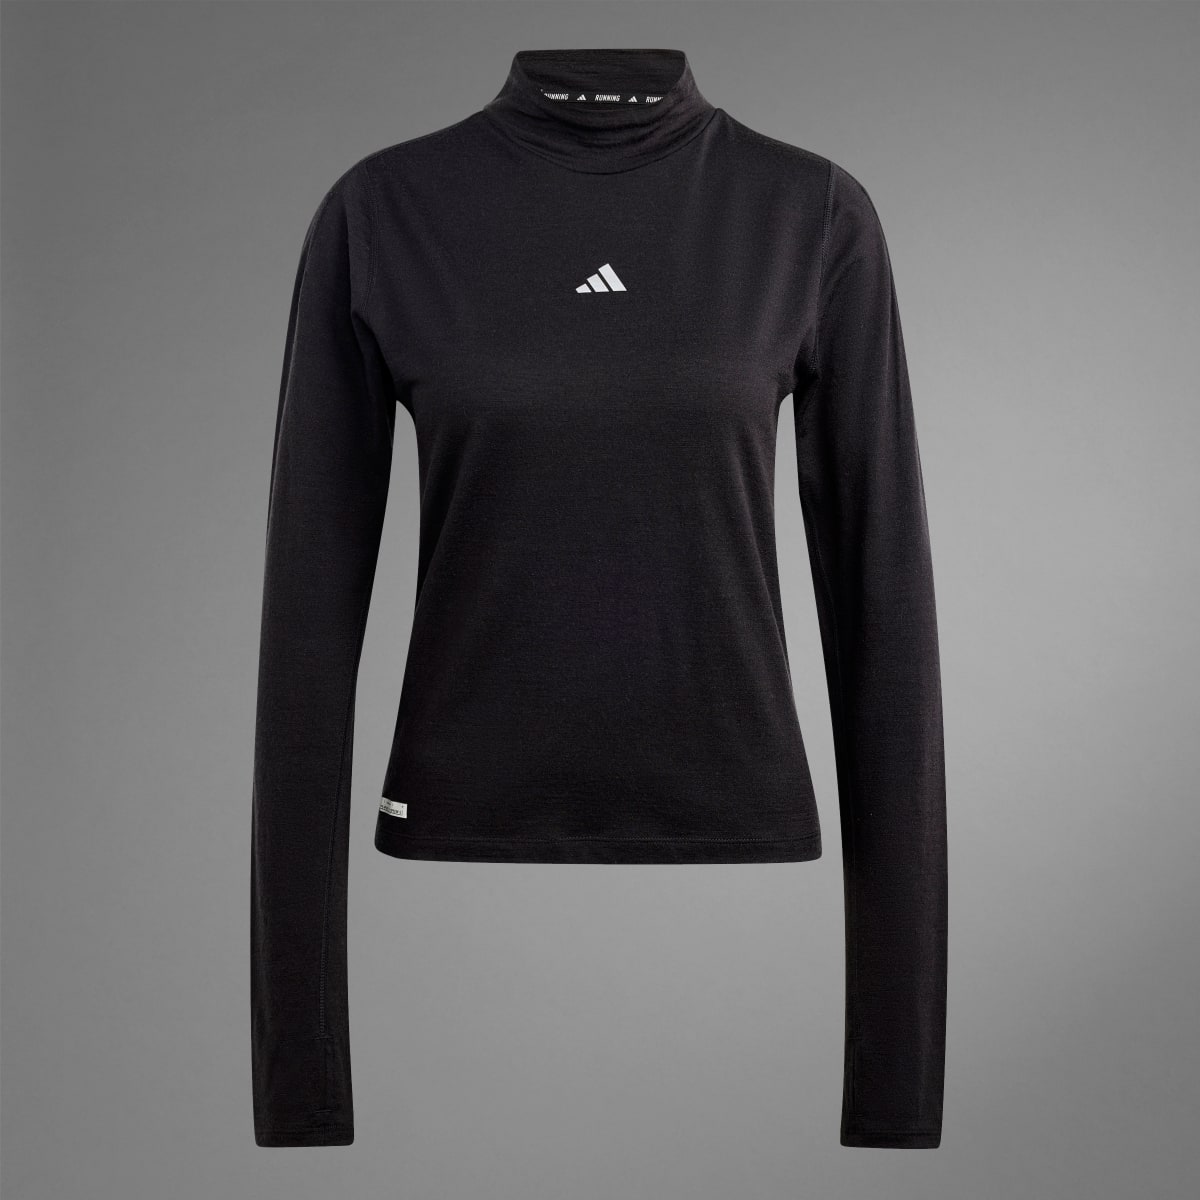 Adidas Ultimate Running Conquer the Elements Merino Long Sleeve Shirt. 9